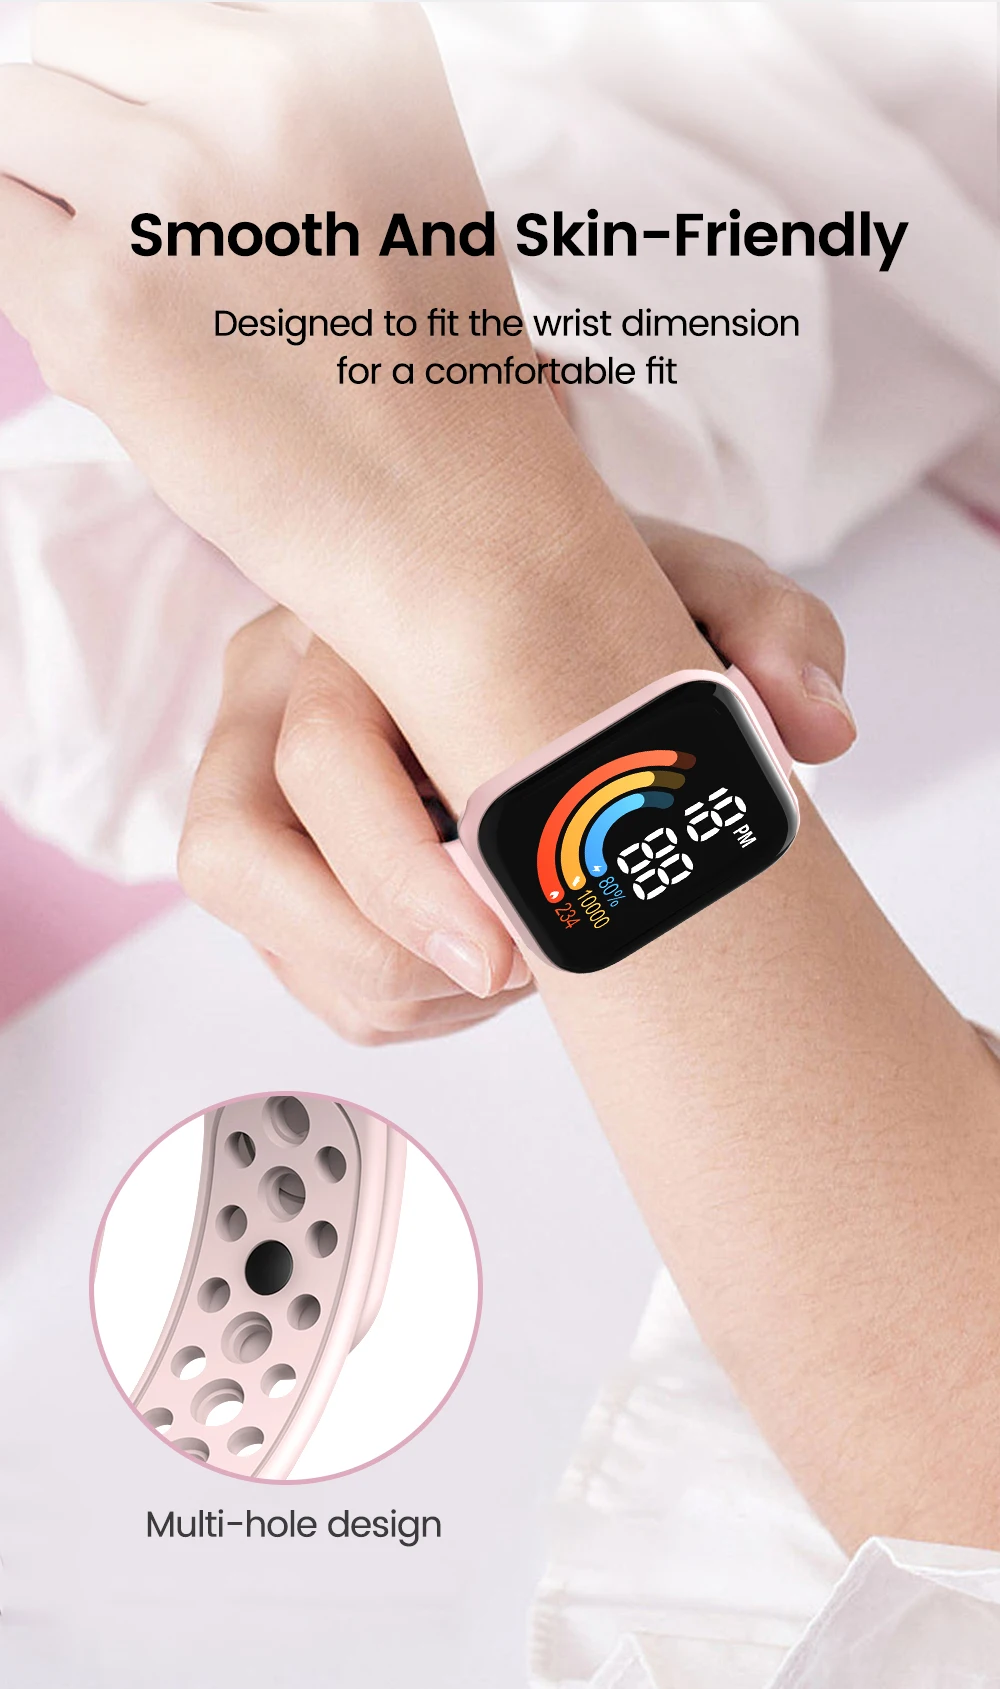 Child Watch Ultra Light LED Digital Watch for Kids Boy Girl Sports Military Silicone Wristband Electronic Clock relogio infantil images - 6